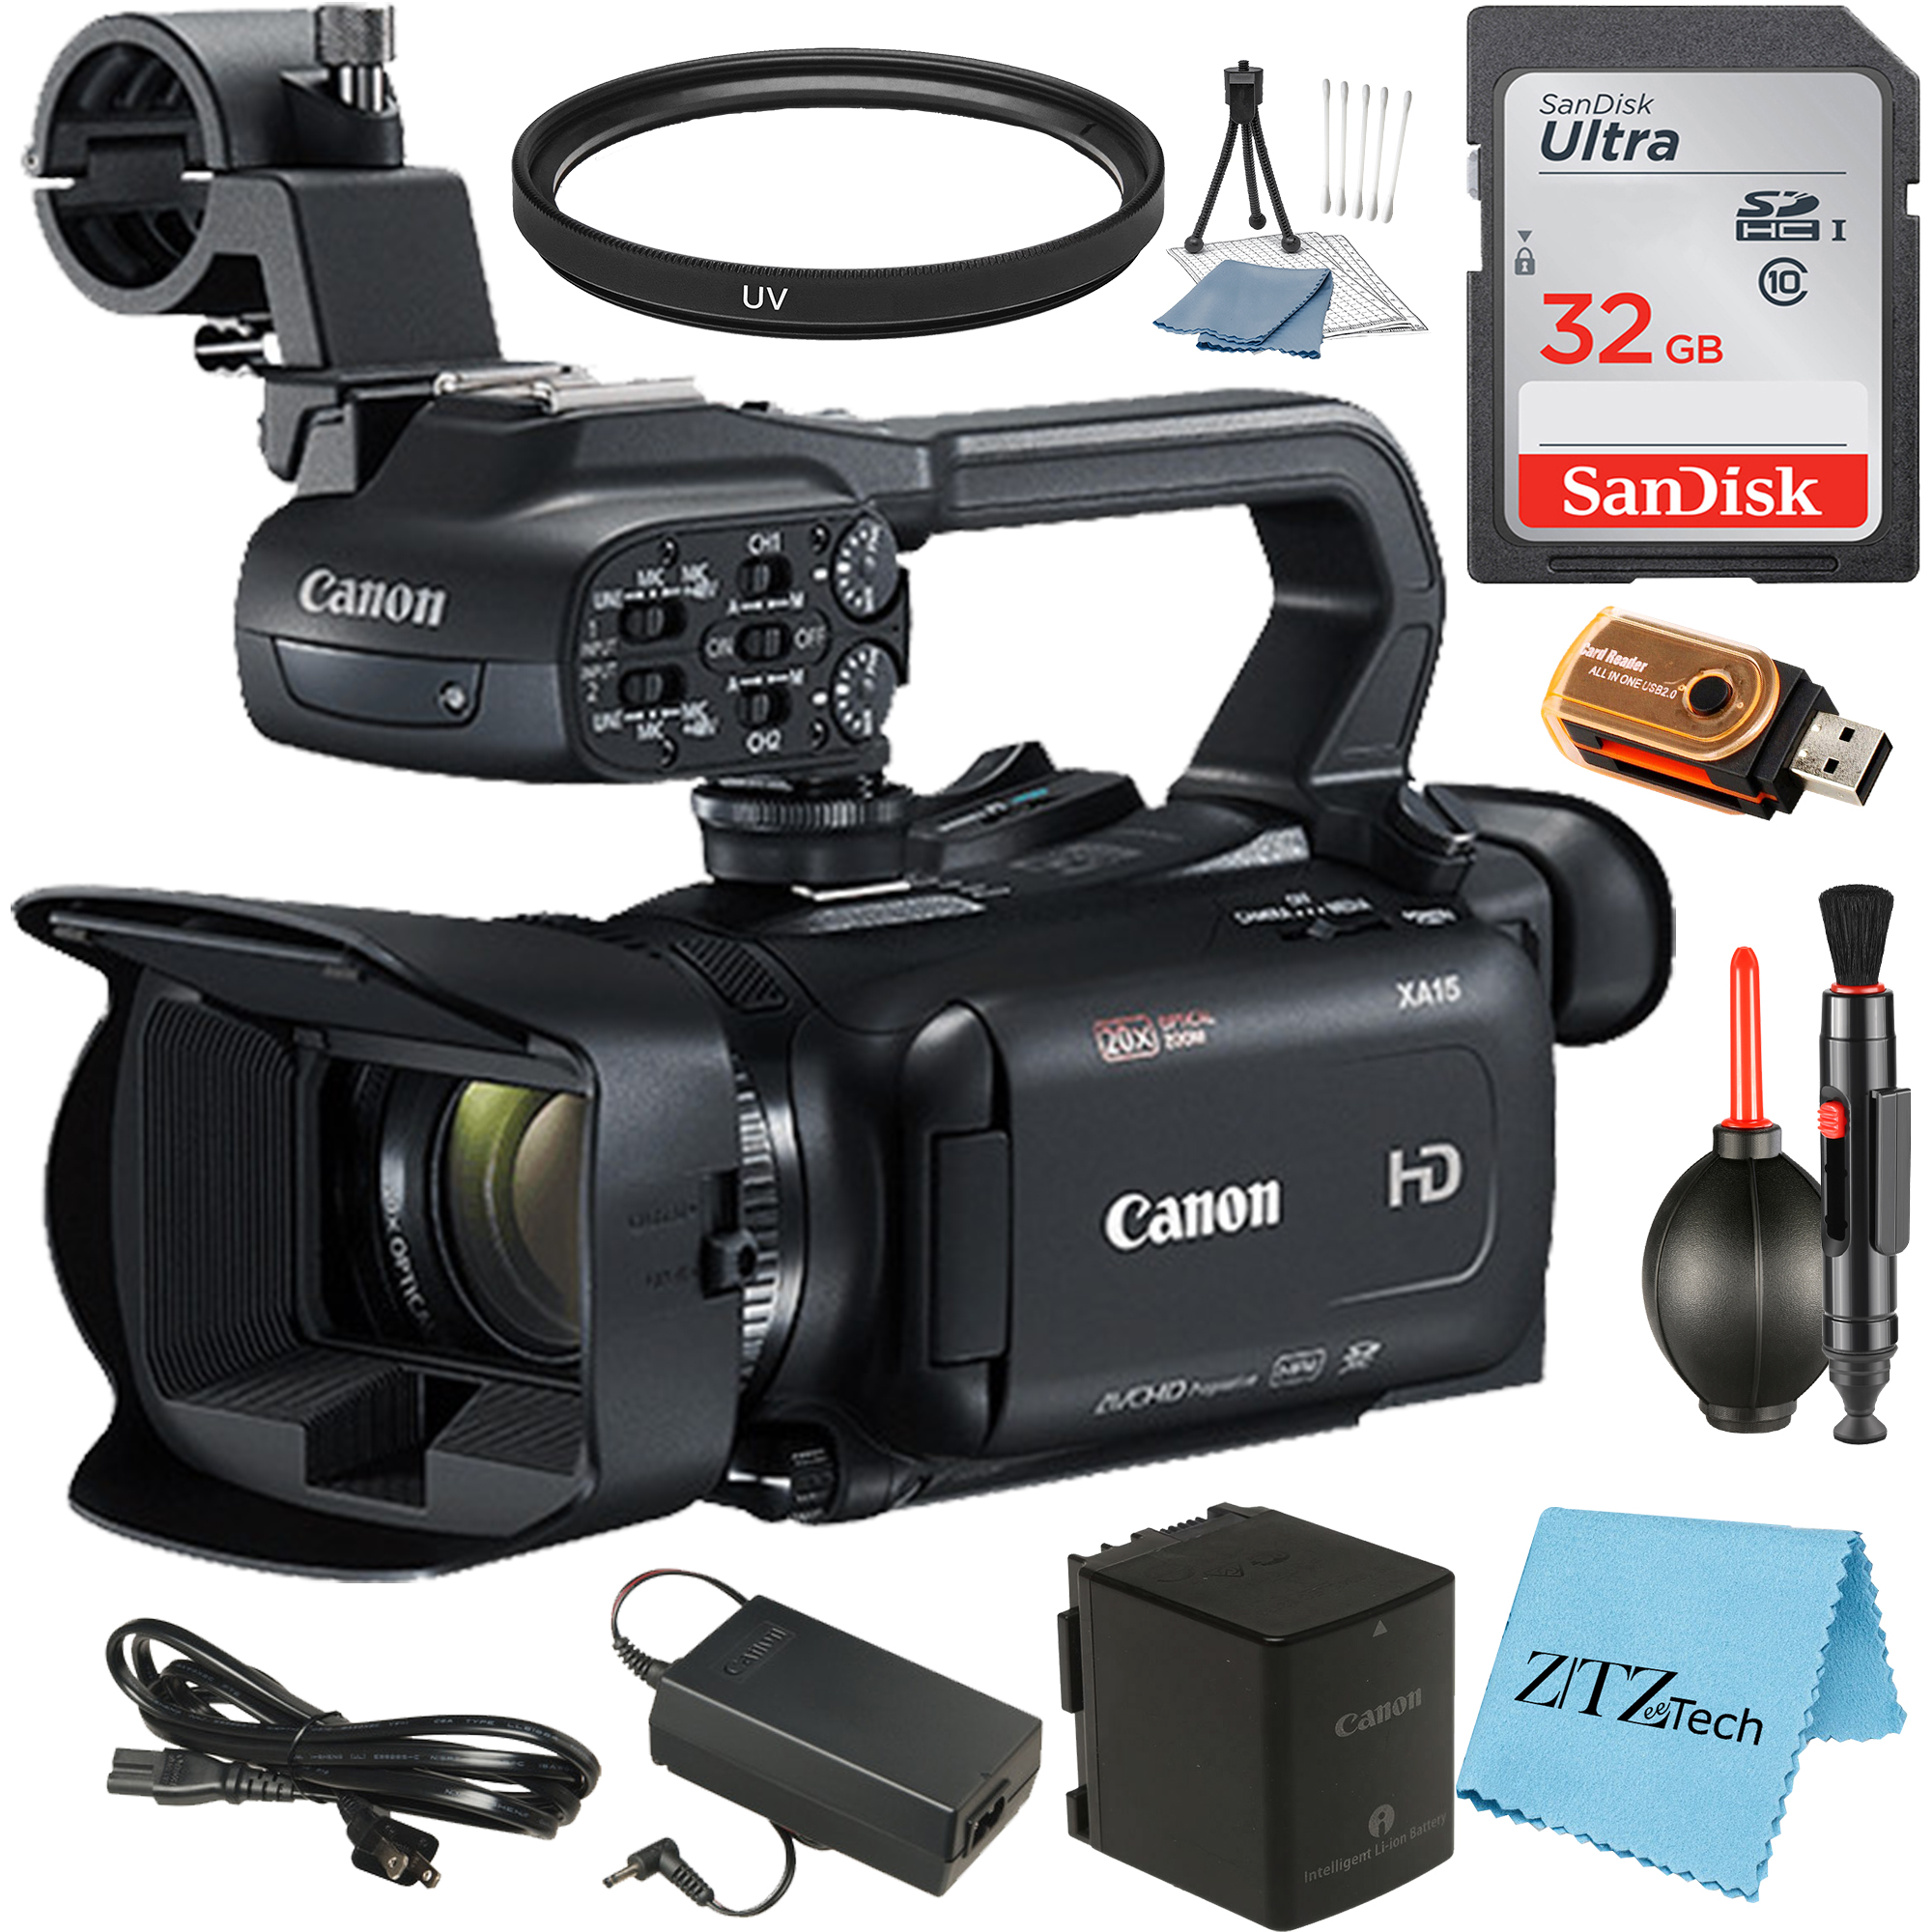 Canon XA15 Compact Full HD Camcorder with 32GB SanDisk Memory Card + UV Filter + ZeeTech Accessory Bundle